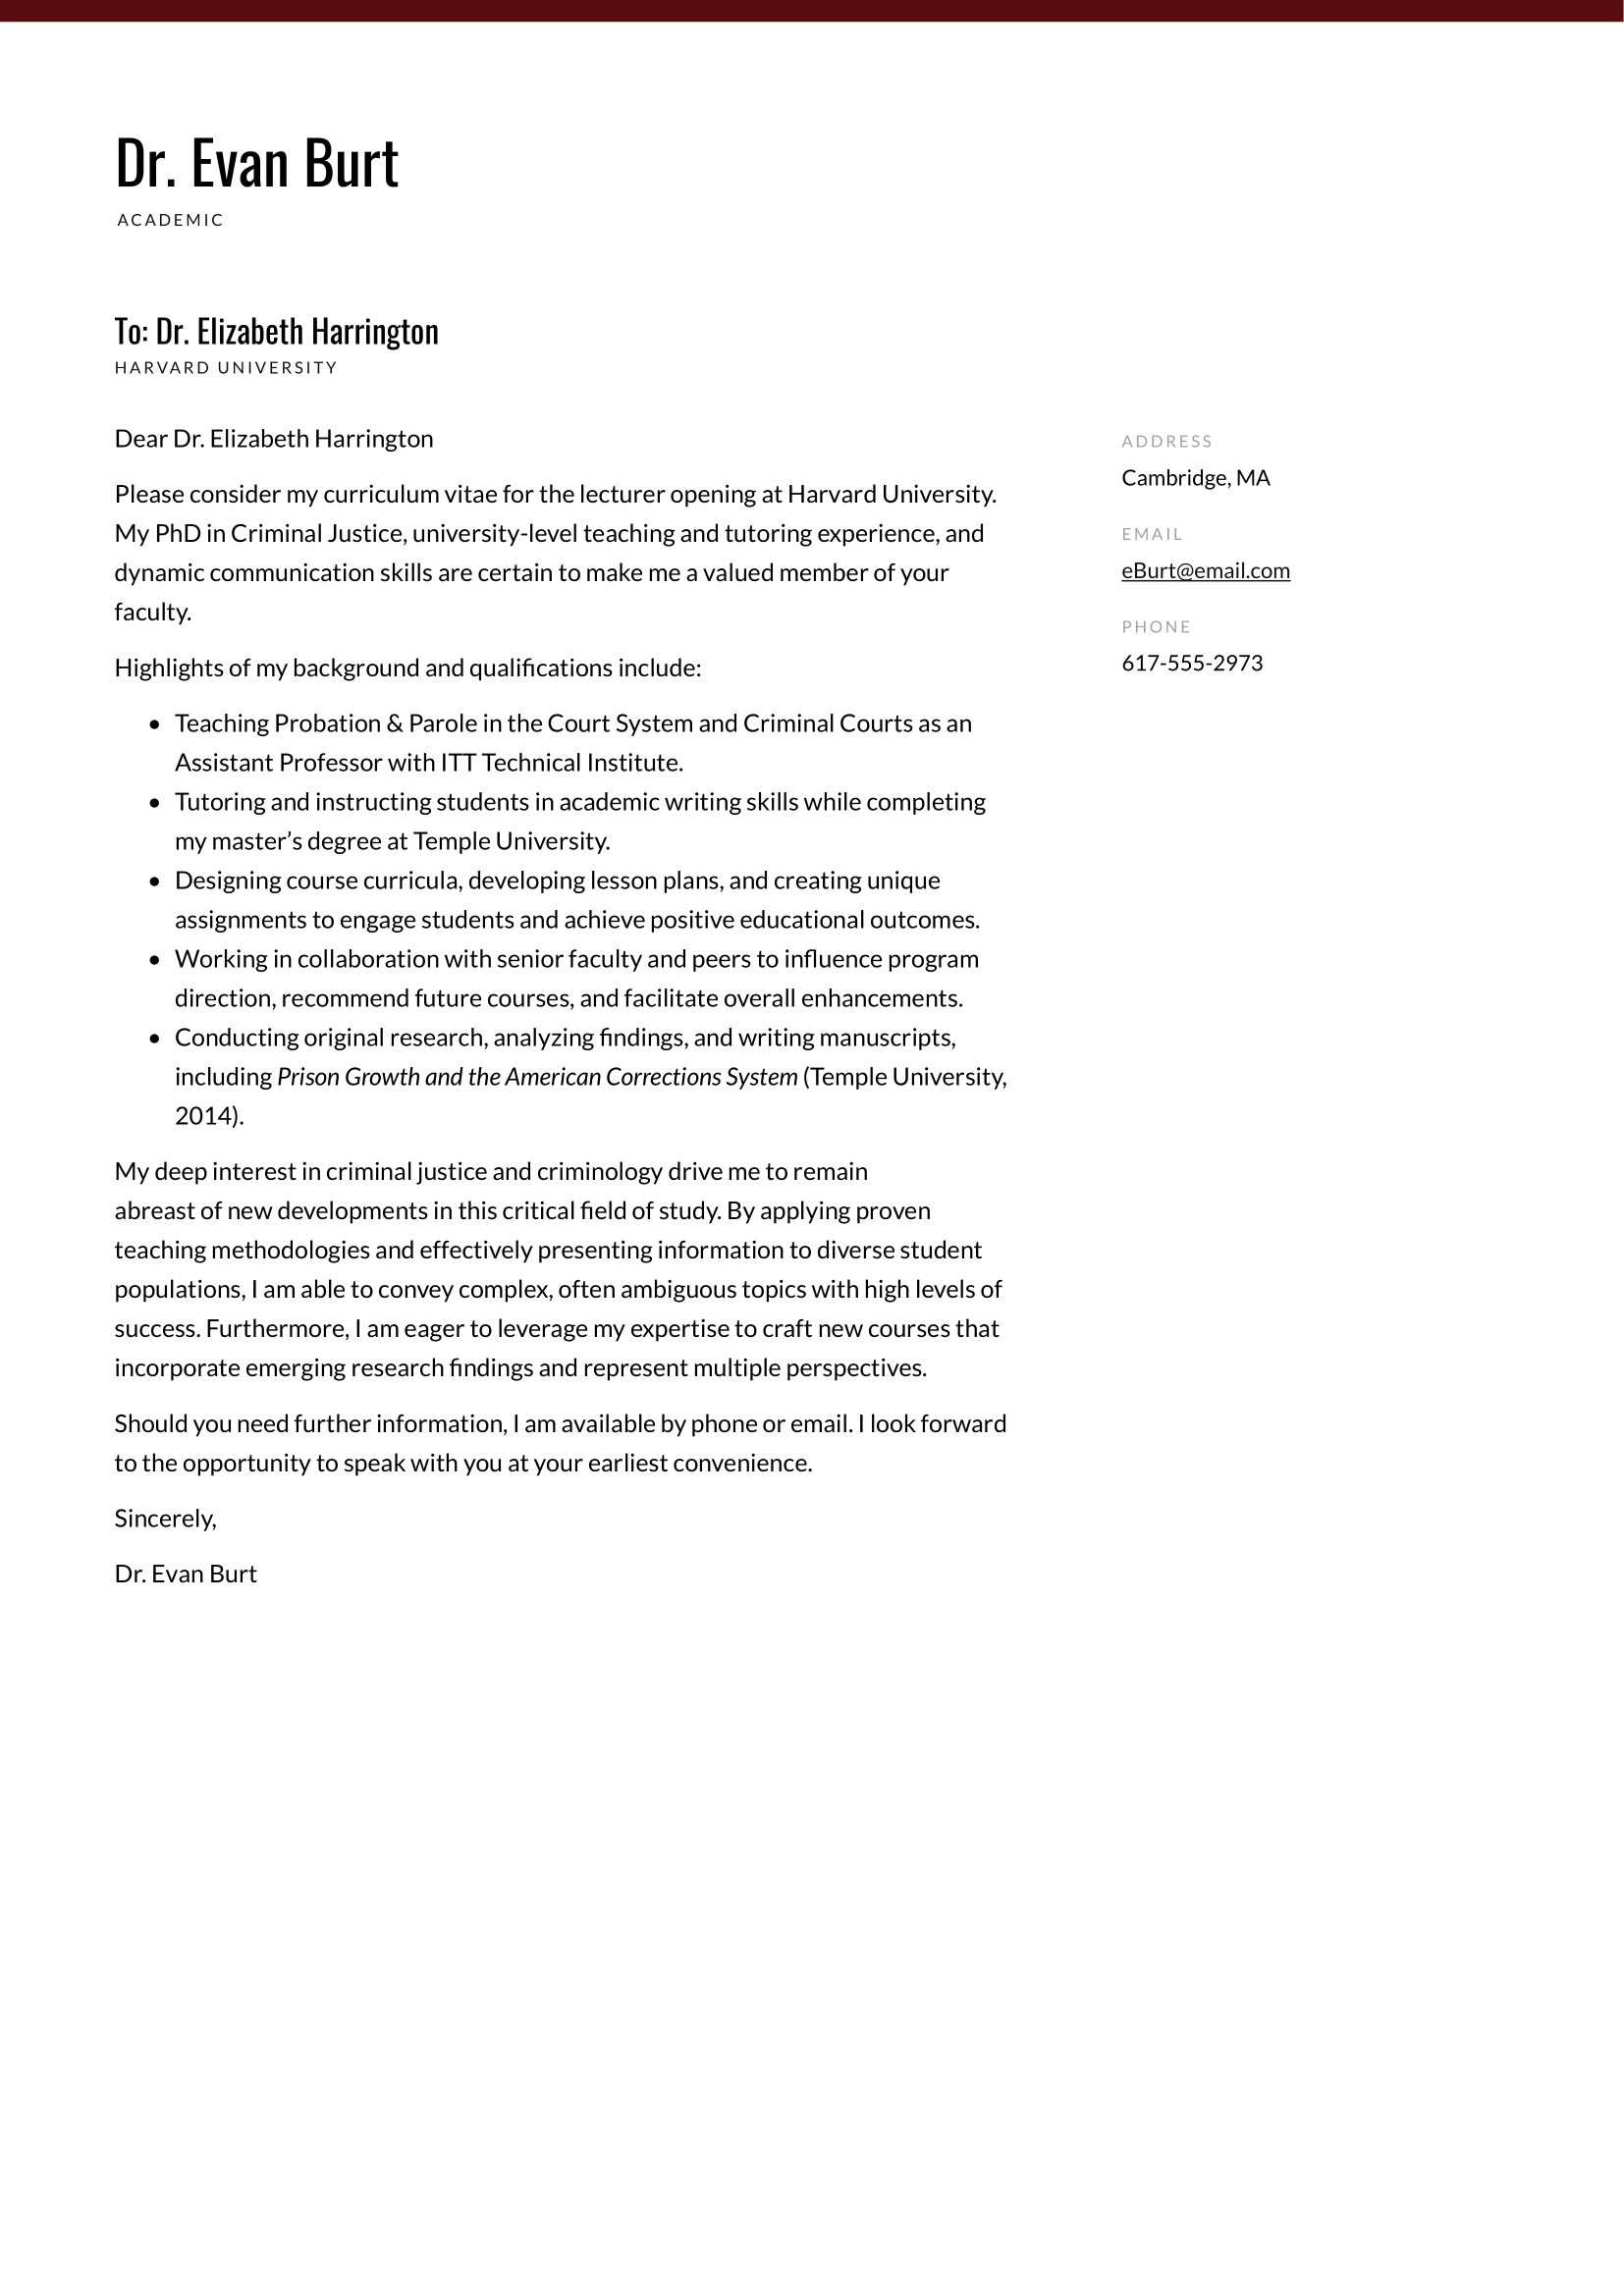 Academic Cover Letter Example & Writing Guide